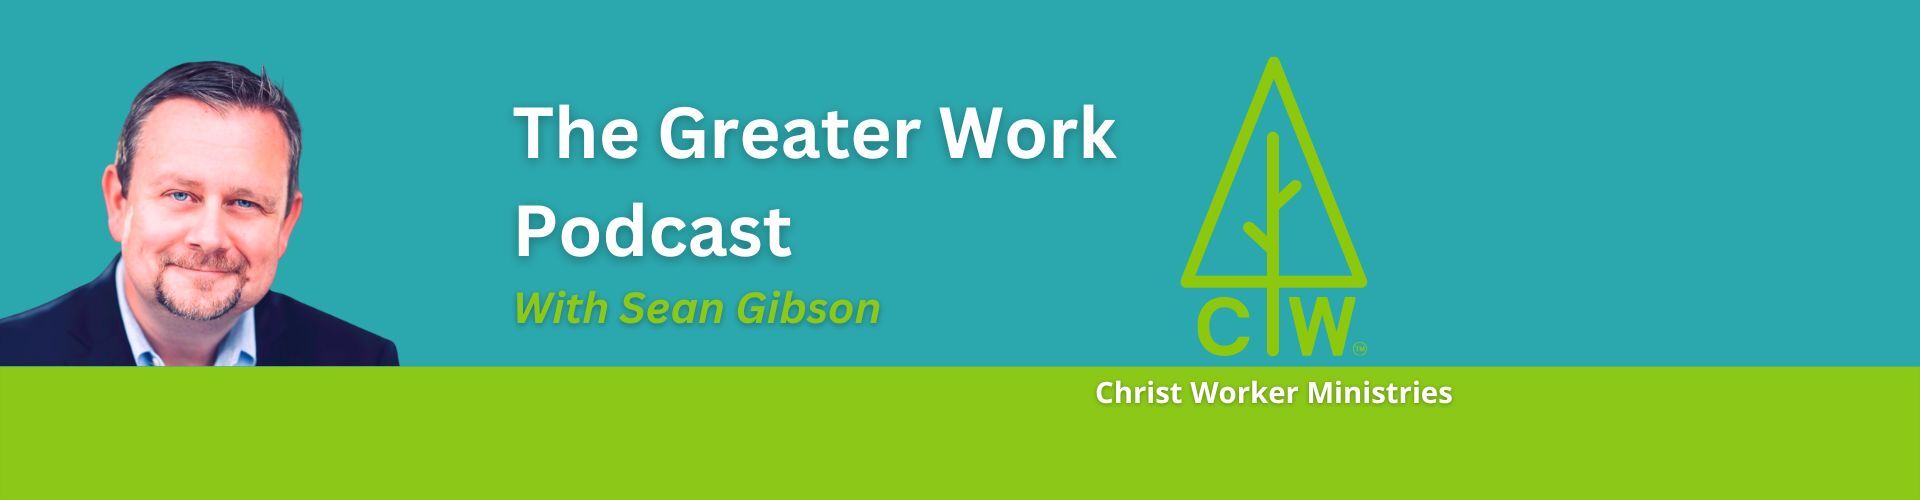 Christ Worker Ministries The Greater Work